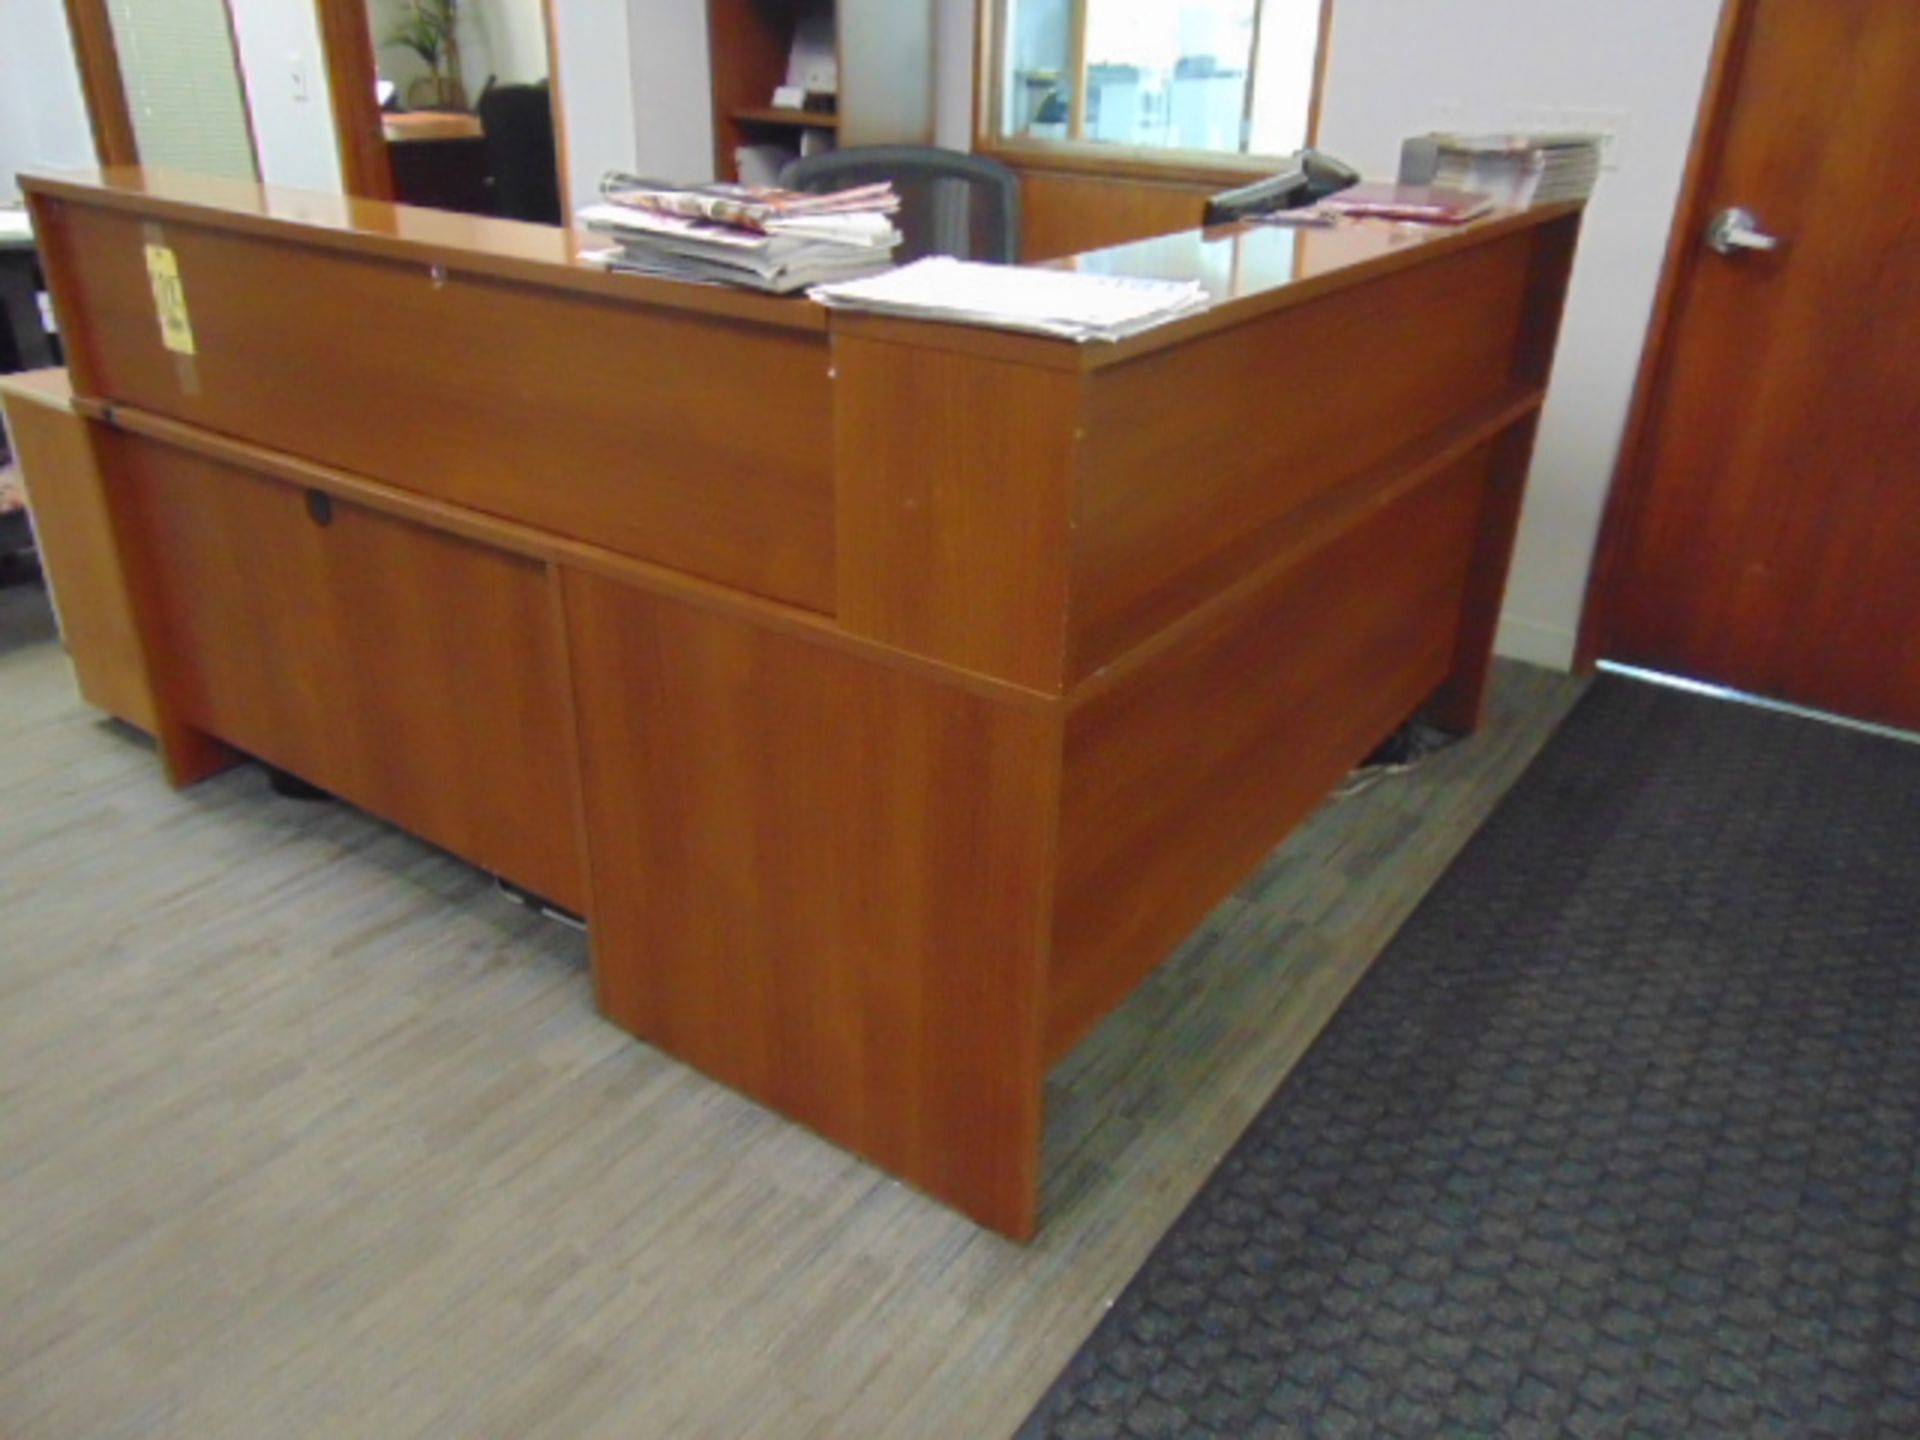 LOT CONSISTING OF: reception desk, bookcase & (6) assorted filed cabinets (no computer)